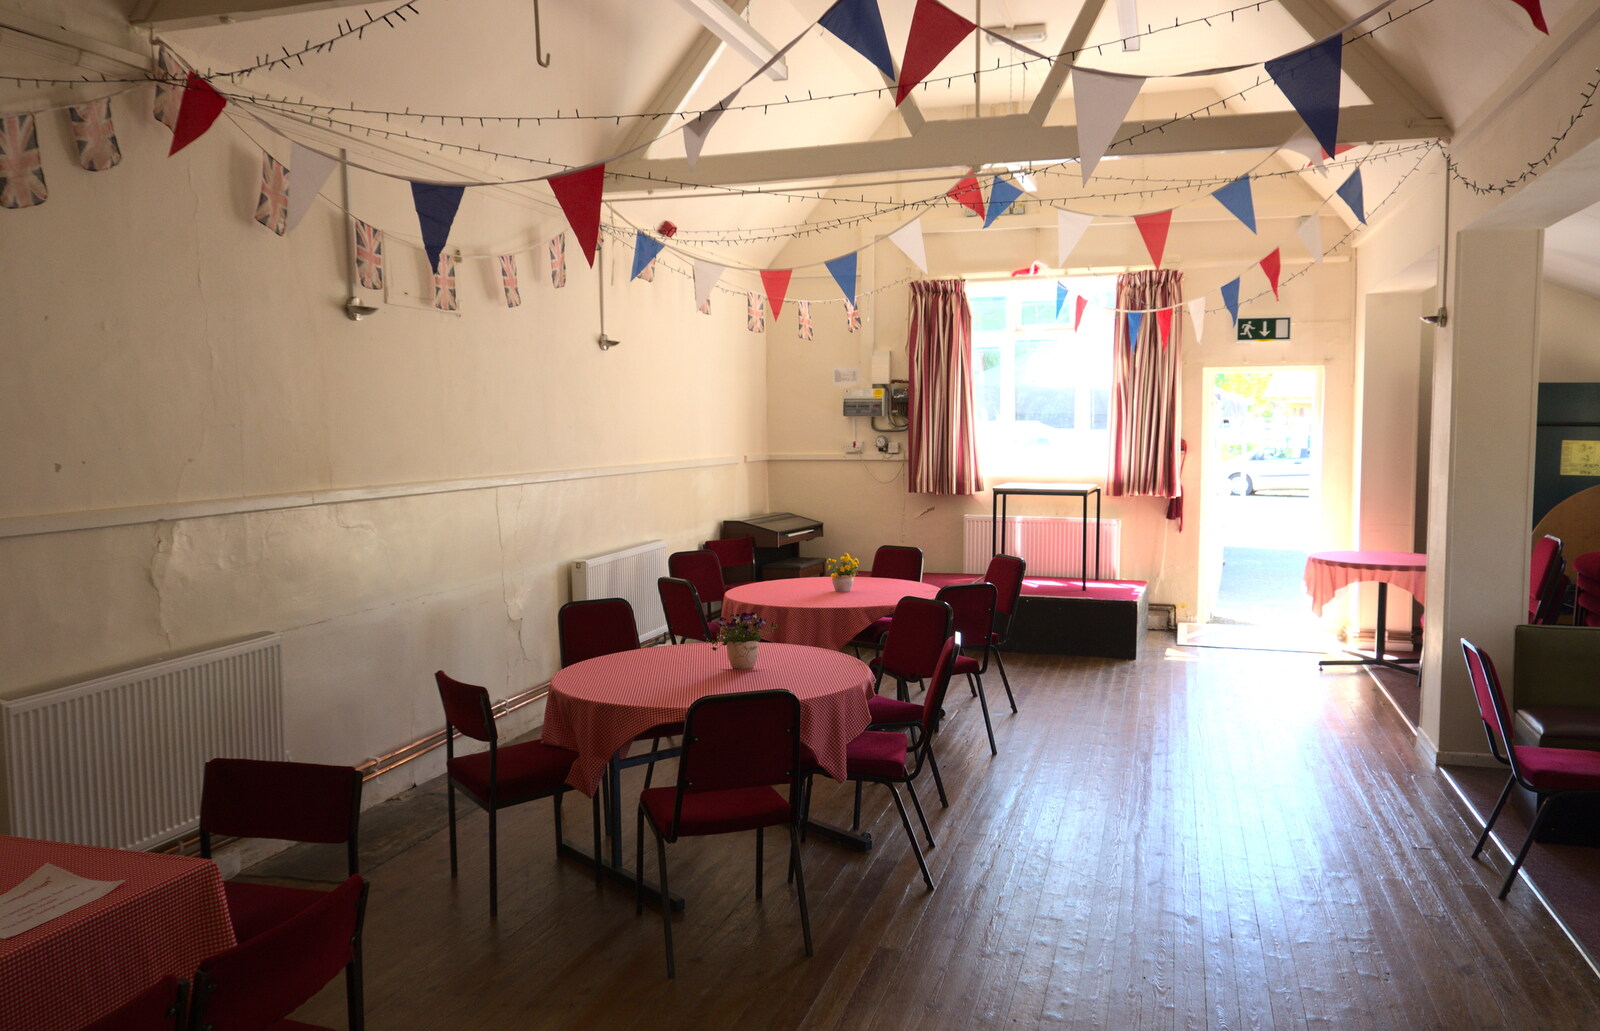 The village hall awaits from A Right Royal Wedding at the Village Hall, Brome, Suffolk - 19th May 2018